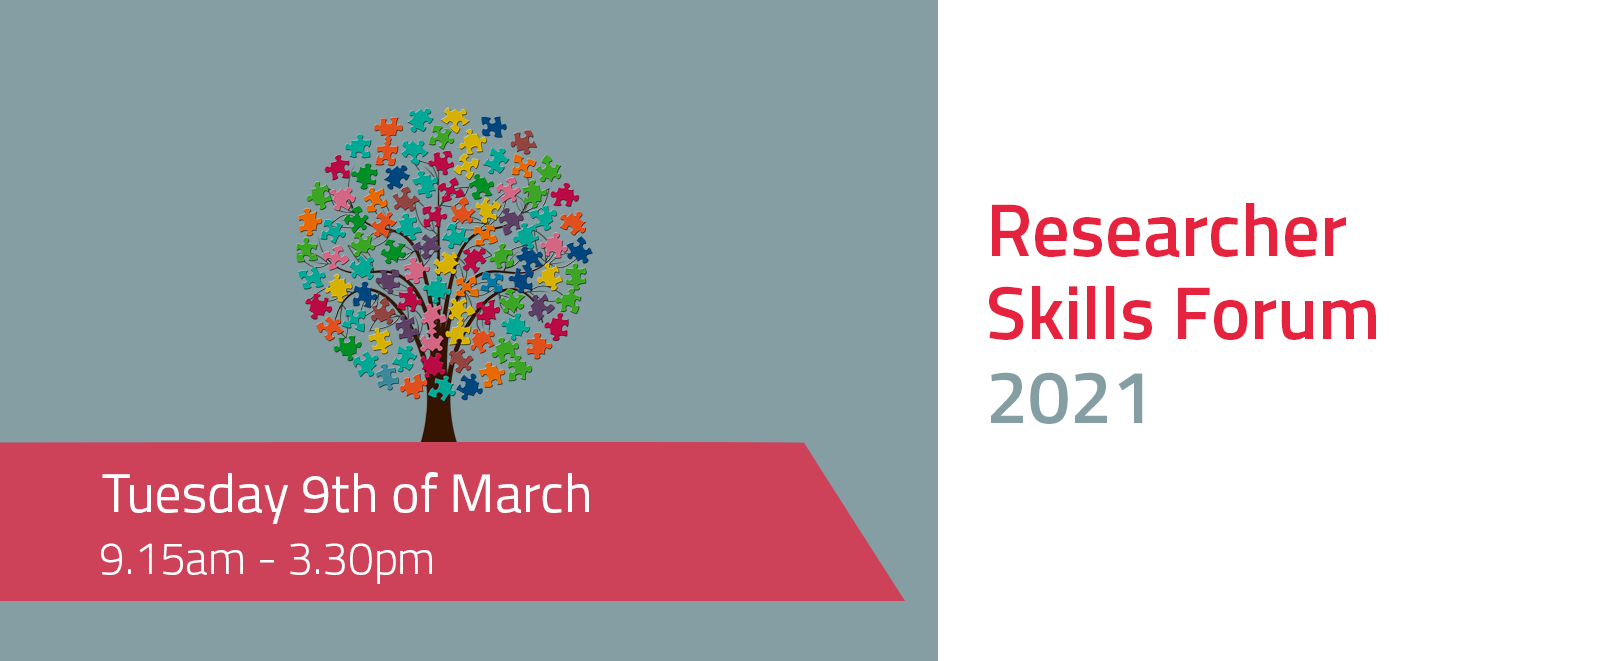 Researcher Skills Forum 2021 - Tuesday 9th March 9.15am to 3.30pm, plus image of a tree with puzzle pieces